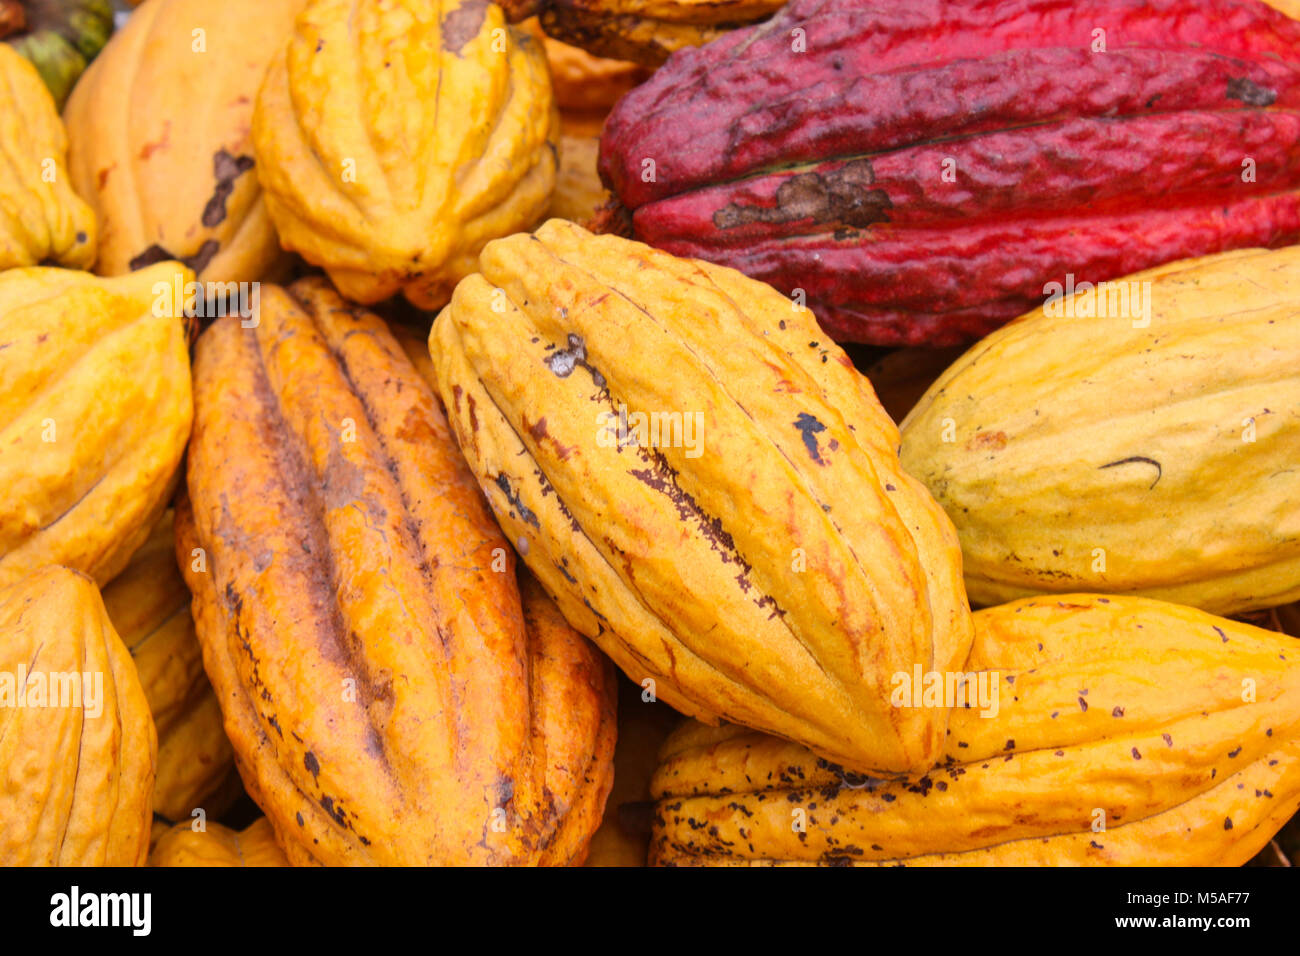 Pile of natural fresh harvested cocoa pods of mixed colors. Stock Photo